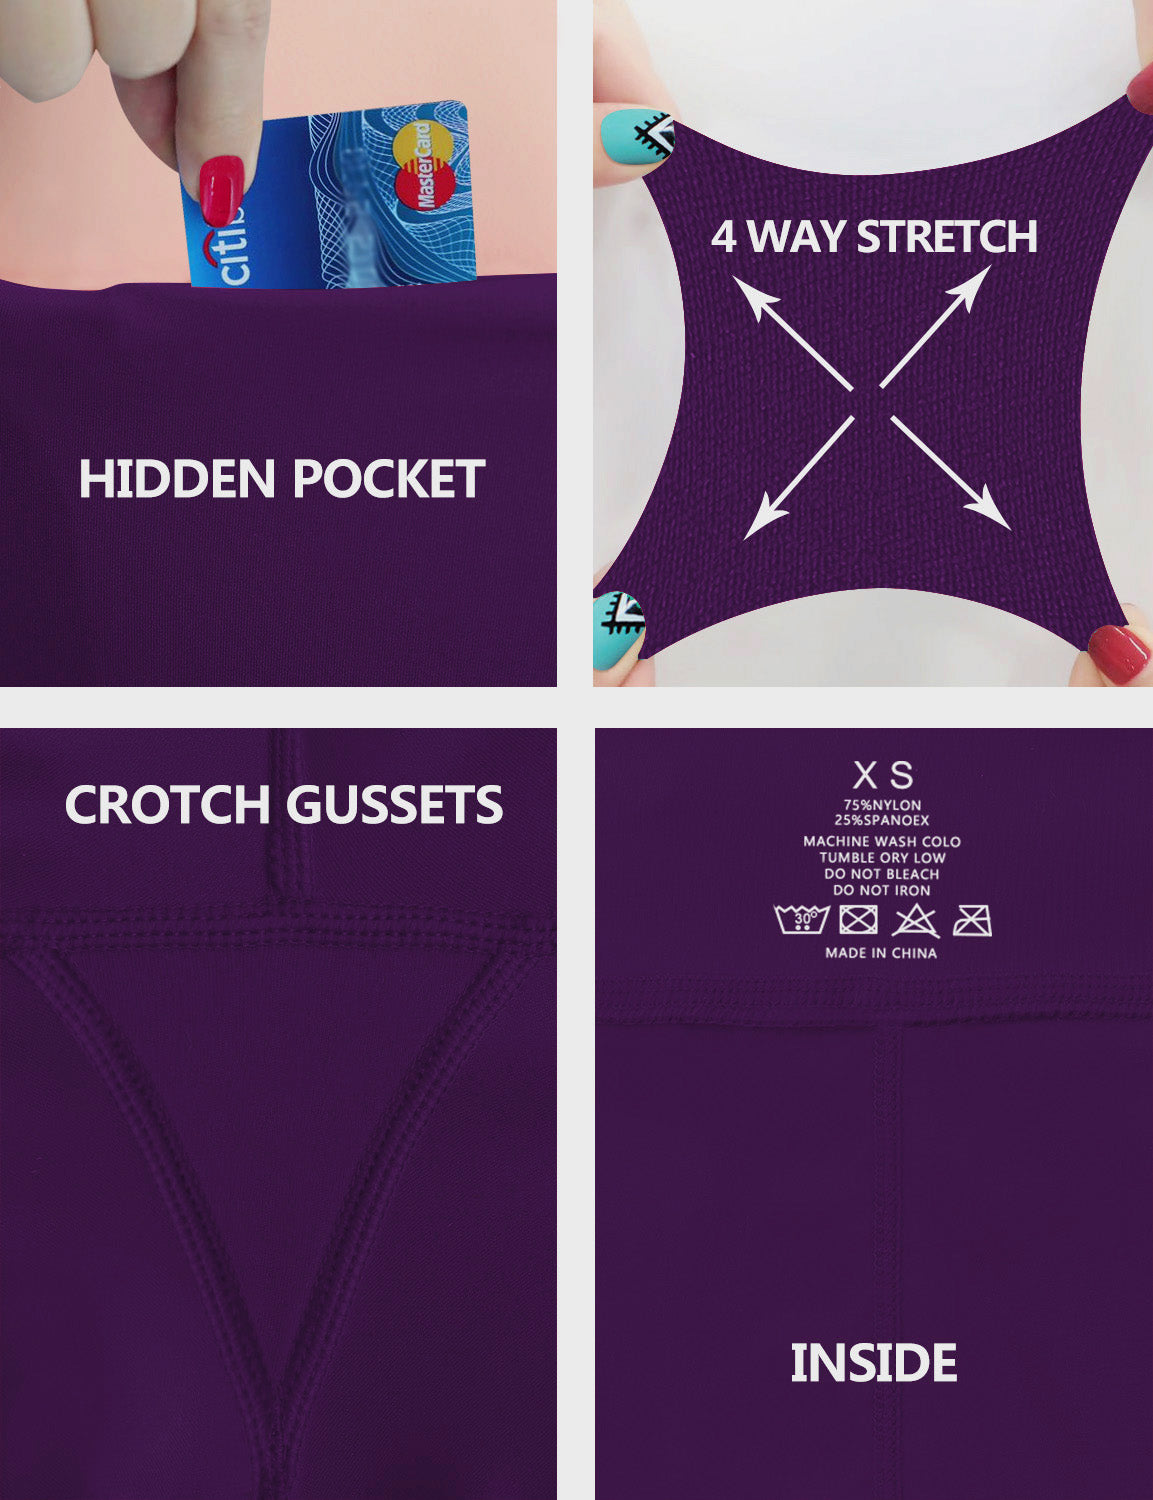 High Waist Side Pockets Biking Pants pansypurple 75% Nylon, 25% Spandex Fabric doesn't attract lint easily 4-way stretch No see-through Moisture-wicking Tummy control Inner pocket